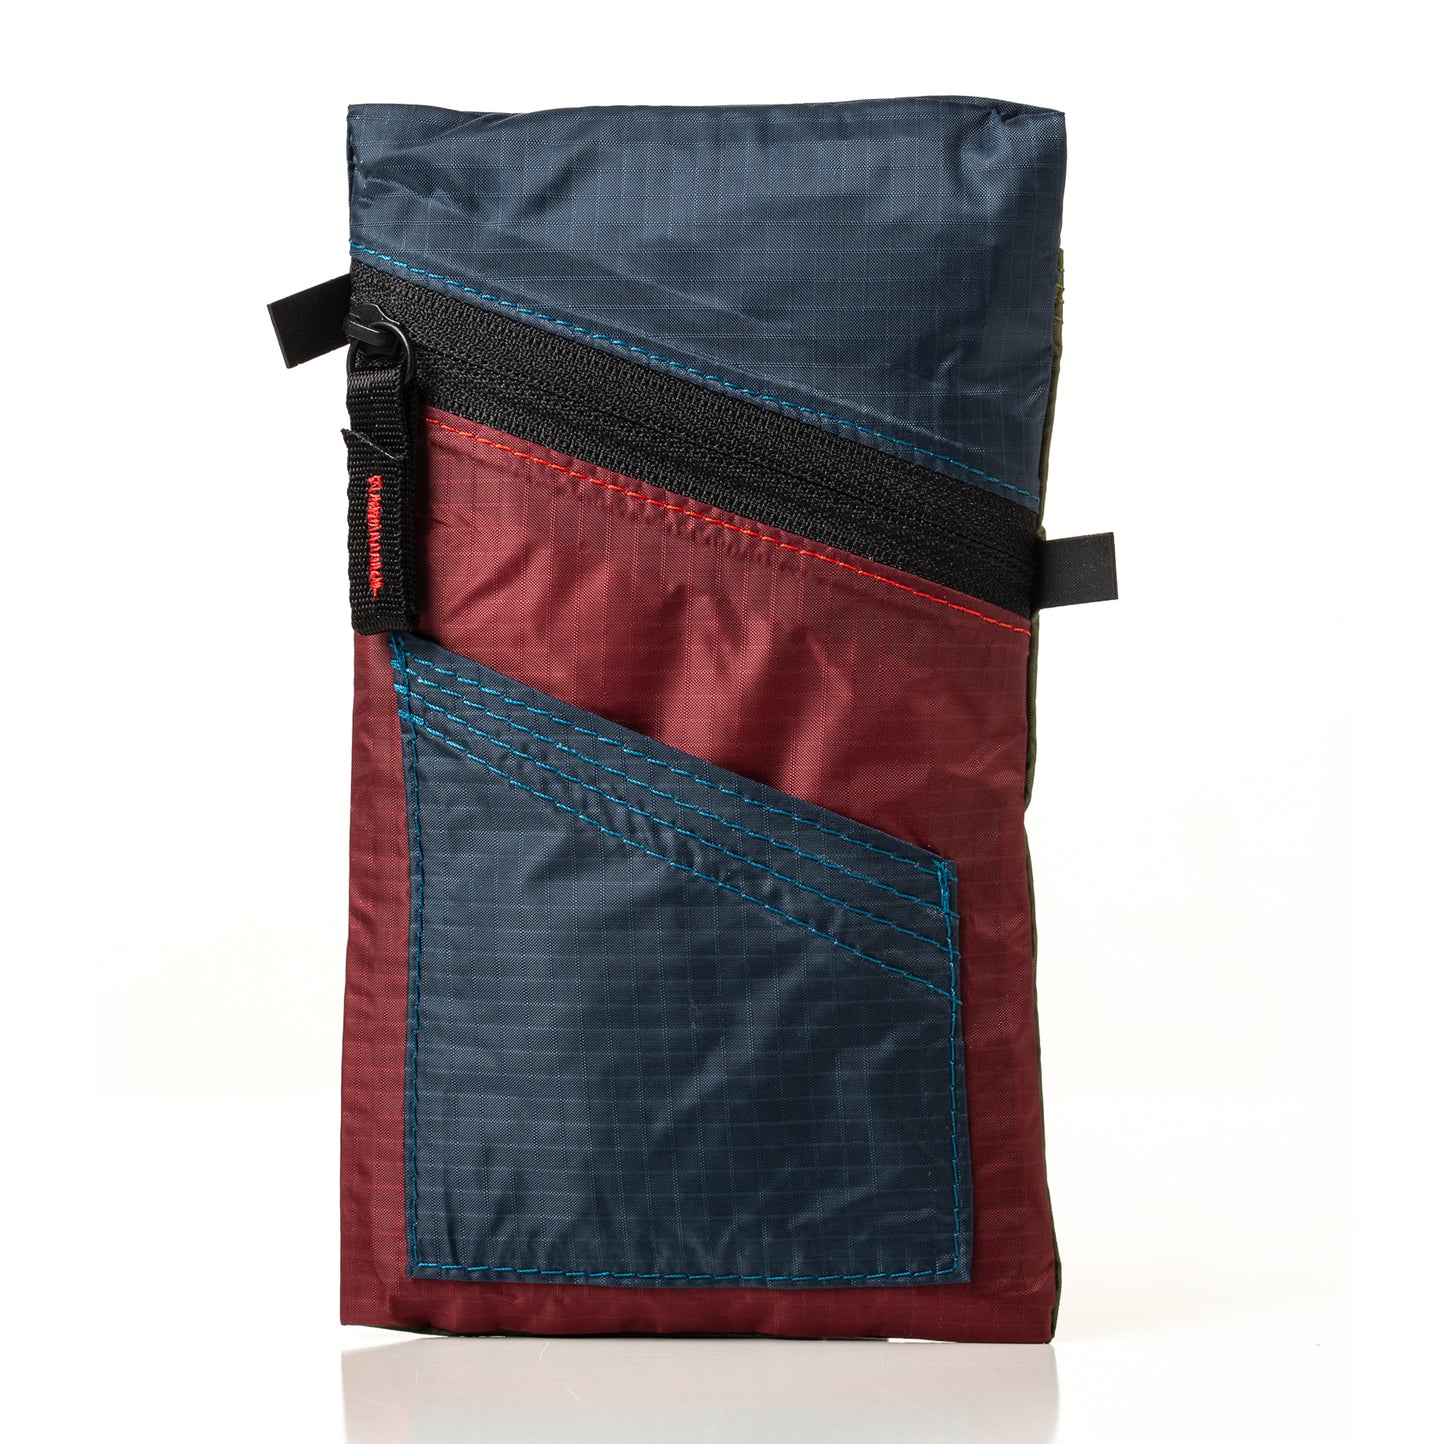 Front view of Fierce Hazel Echelon Ultralightweight weatherproof seam-sealed cycling pouch sustainable zipper phone pouch 30D PU + silicon-coated nylon